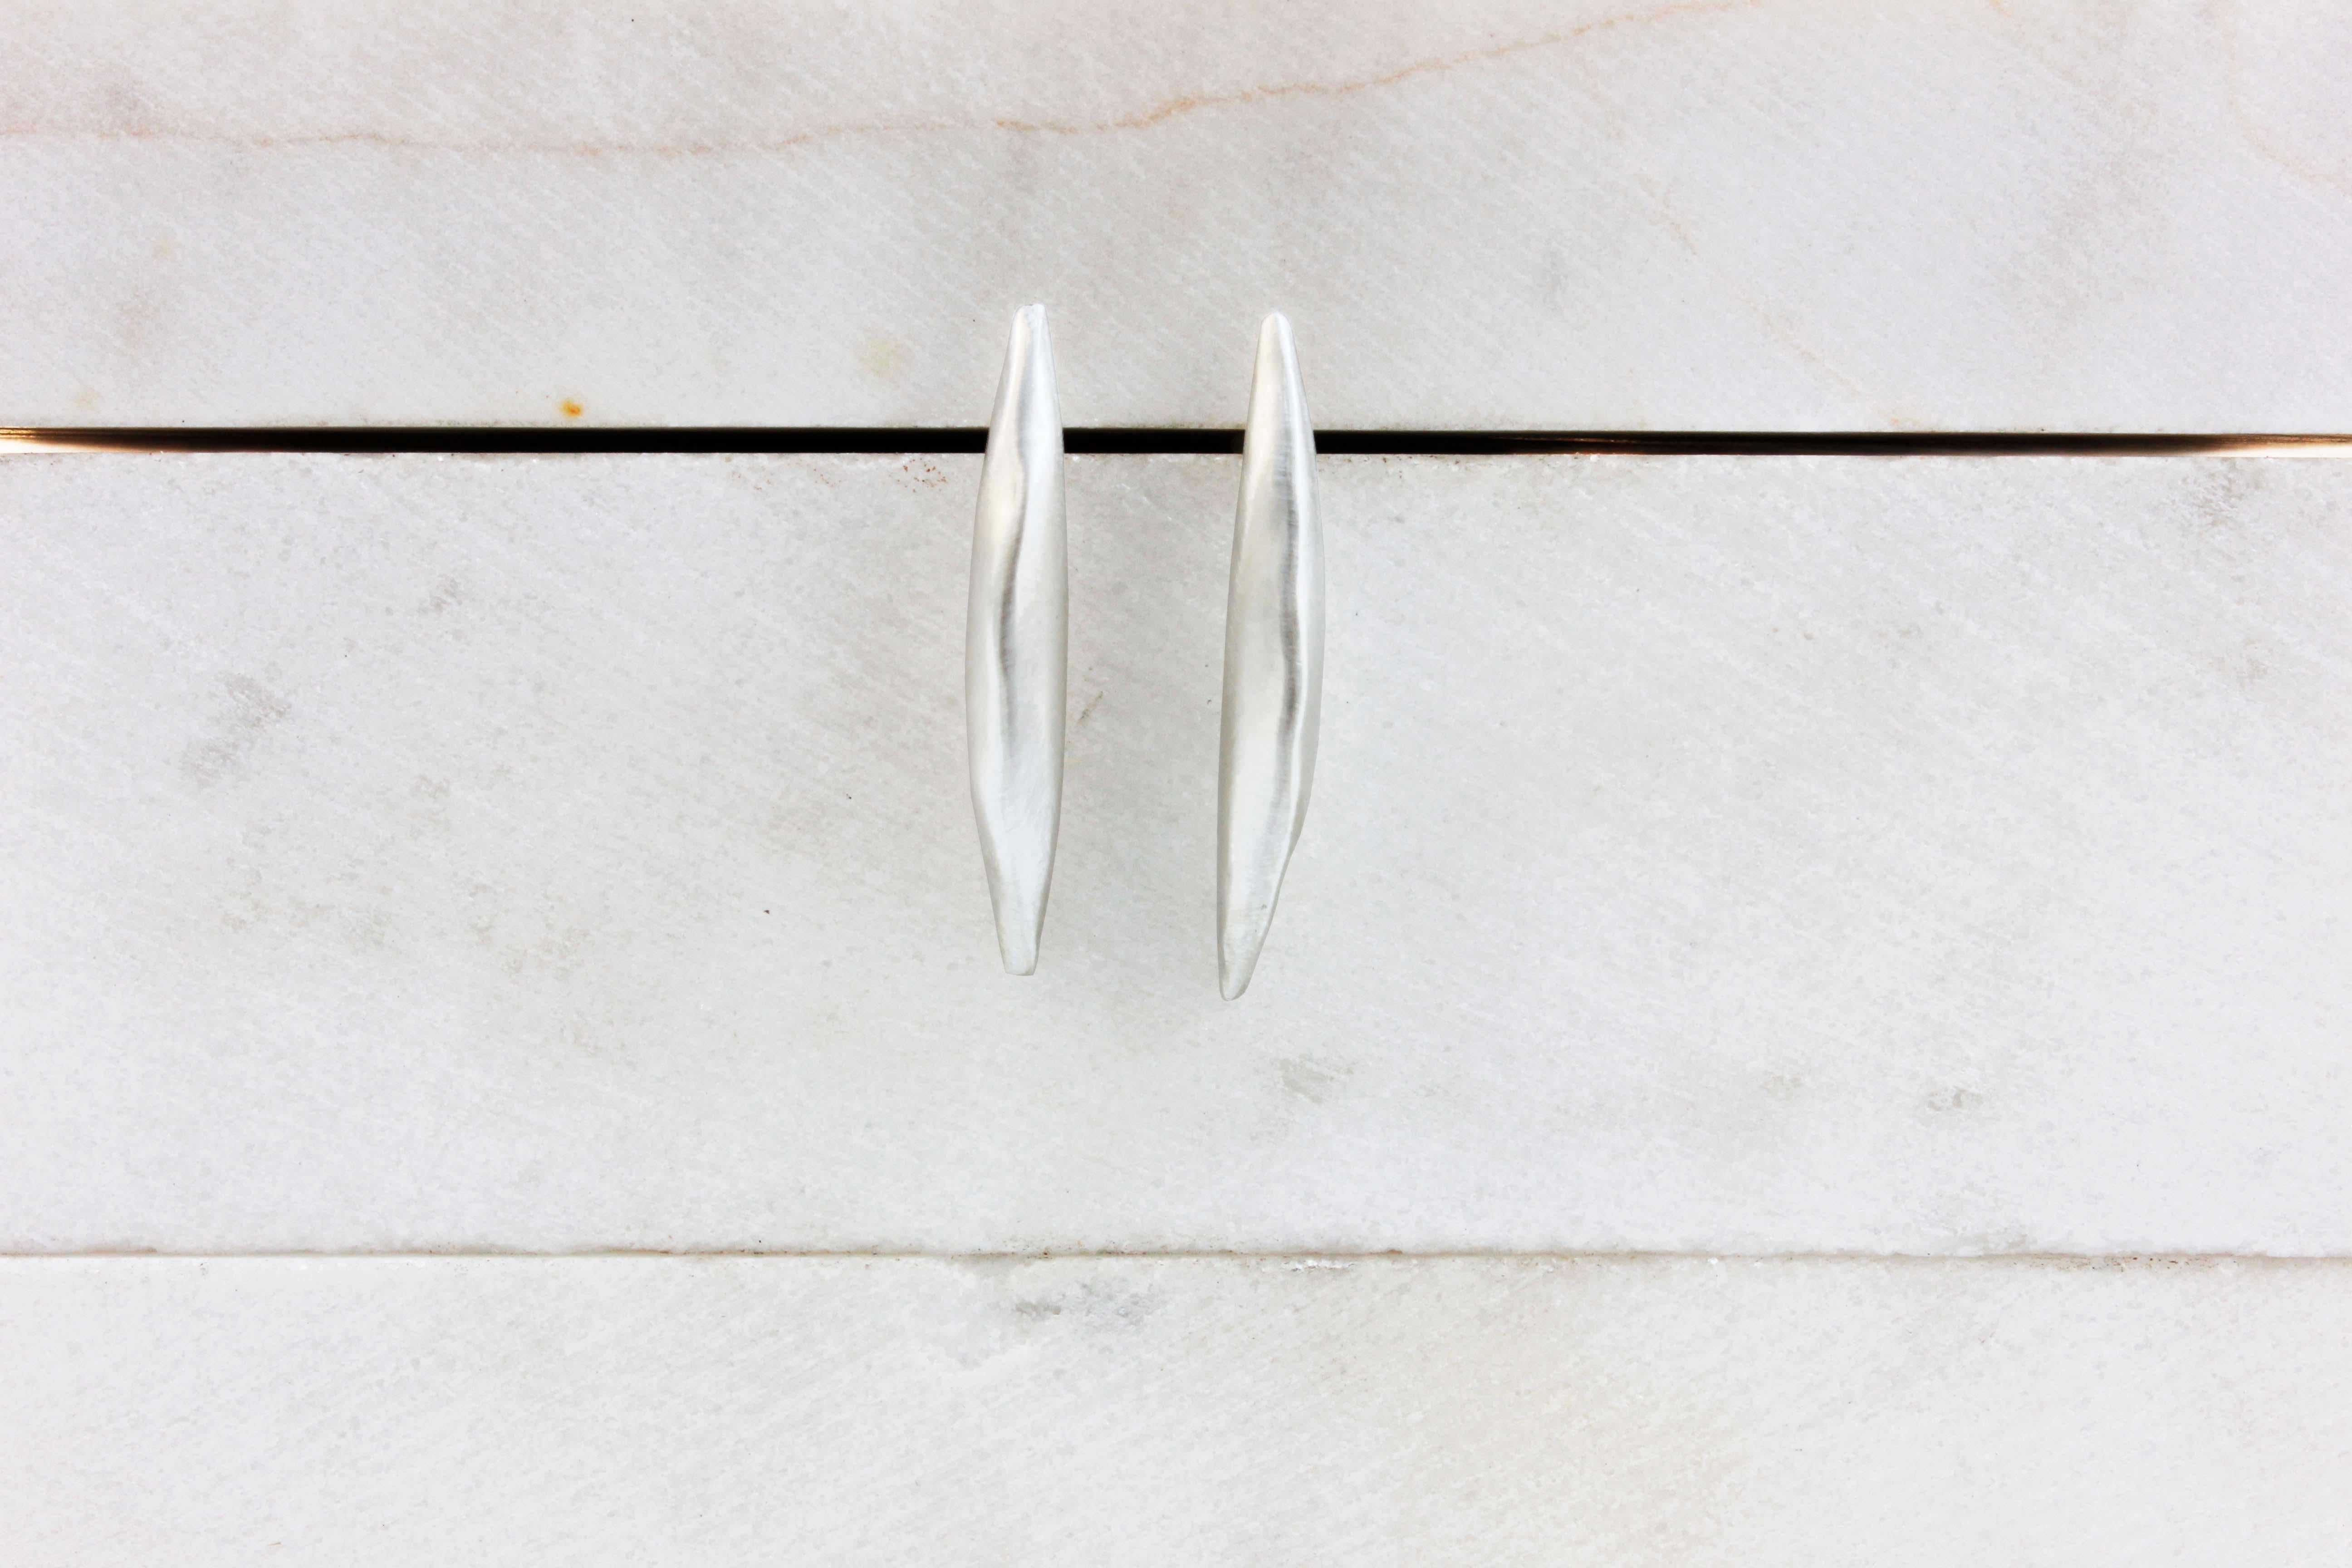 These elegant everyday “feather” earrings are empty inside and therefore elegant and lightweight.

Each piece is hammered by hand from a flat sheet into a hollow form, with the edges coming together perfectly above the curve.

Width: 0.4cm
Length: